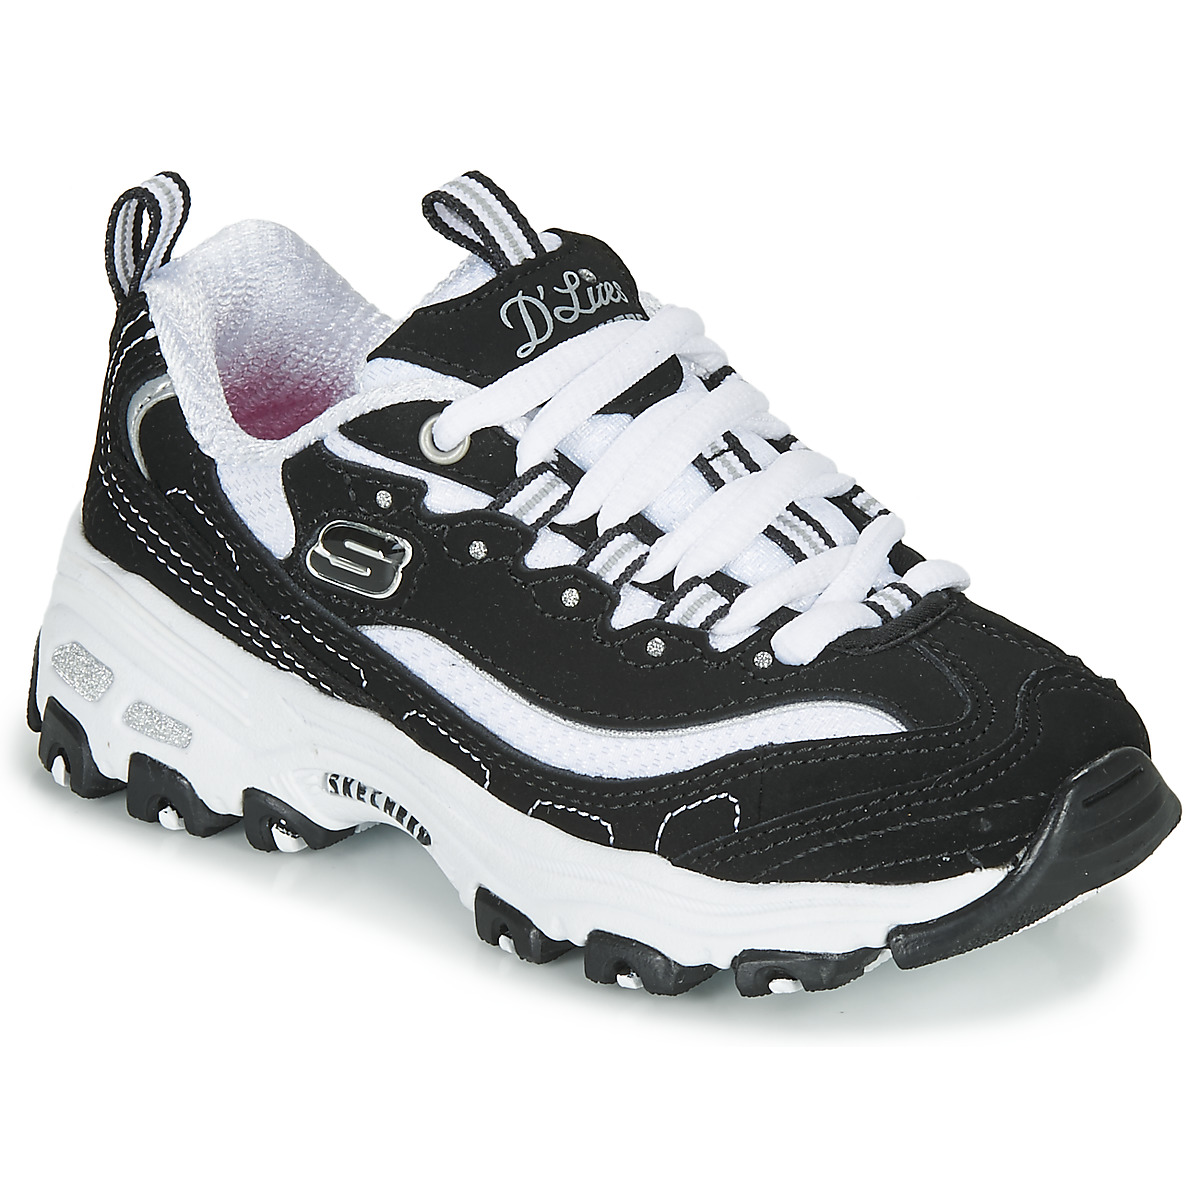 Skechers D'LITES Black White - delivery | Spartoo UK ! - Shoes Low top trainers Child £ 36.40